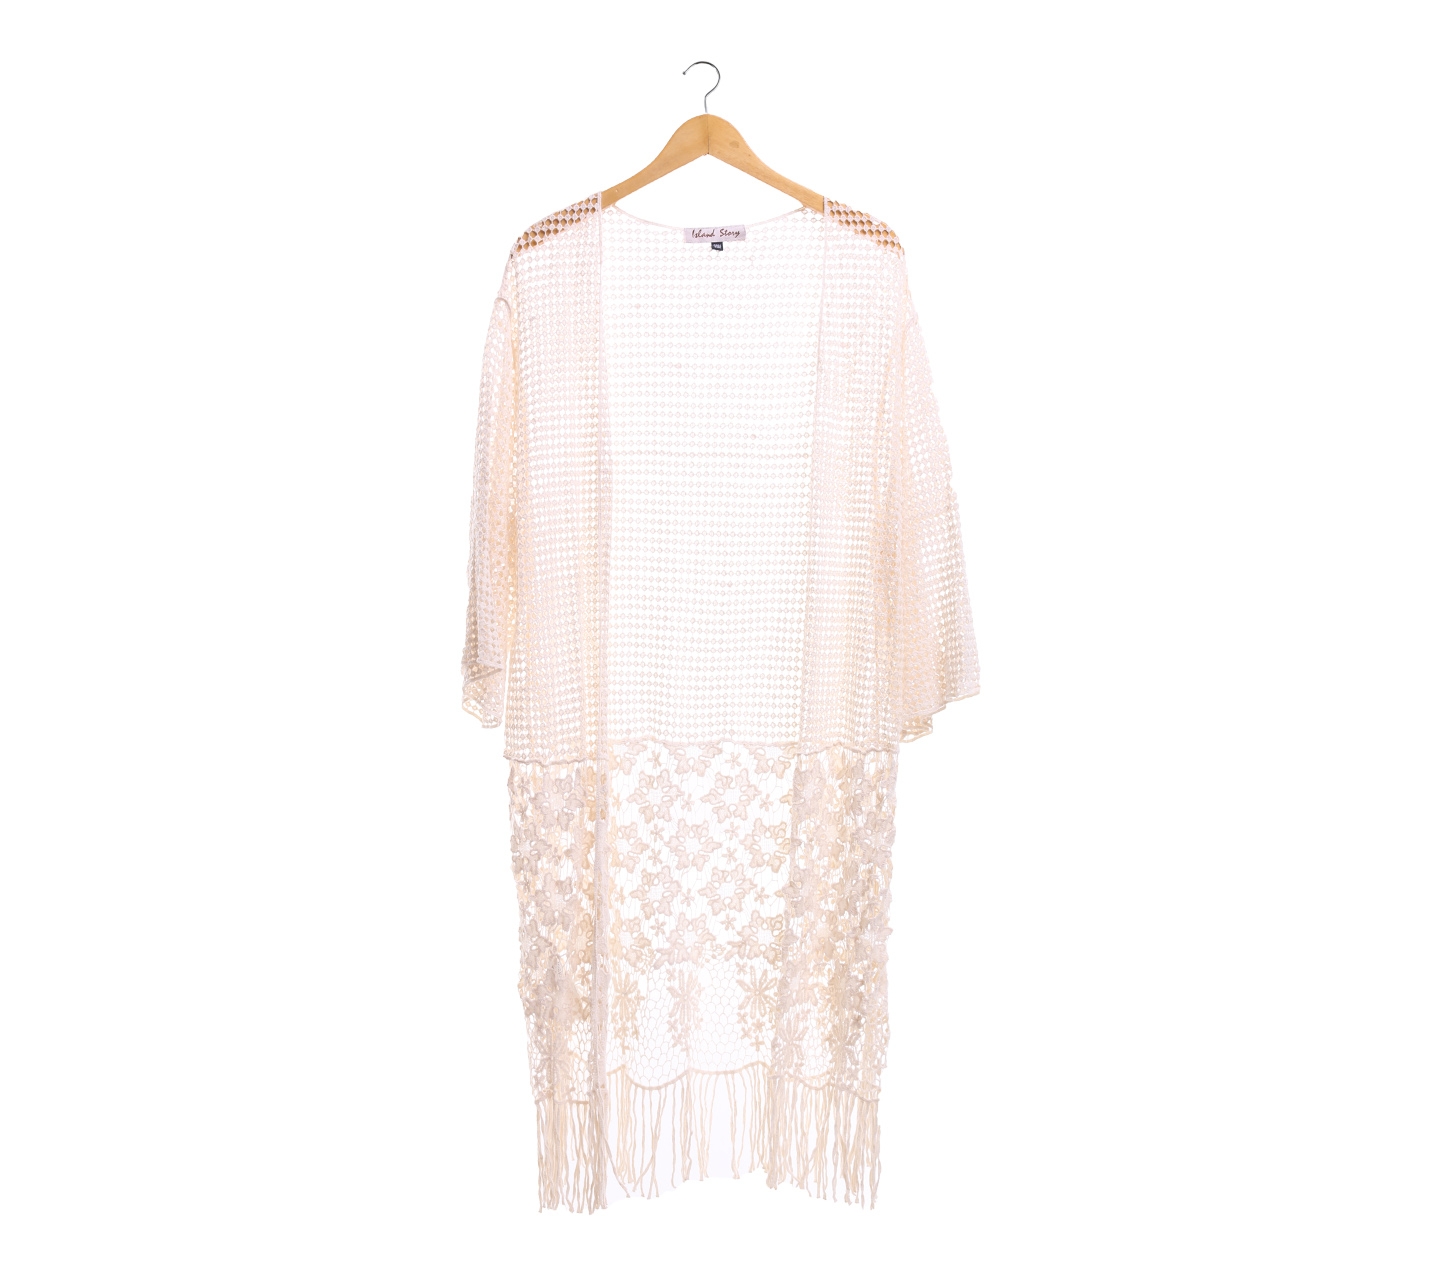 Island Story Cream Lace Outerwear